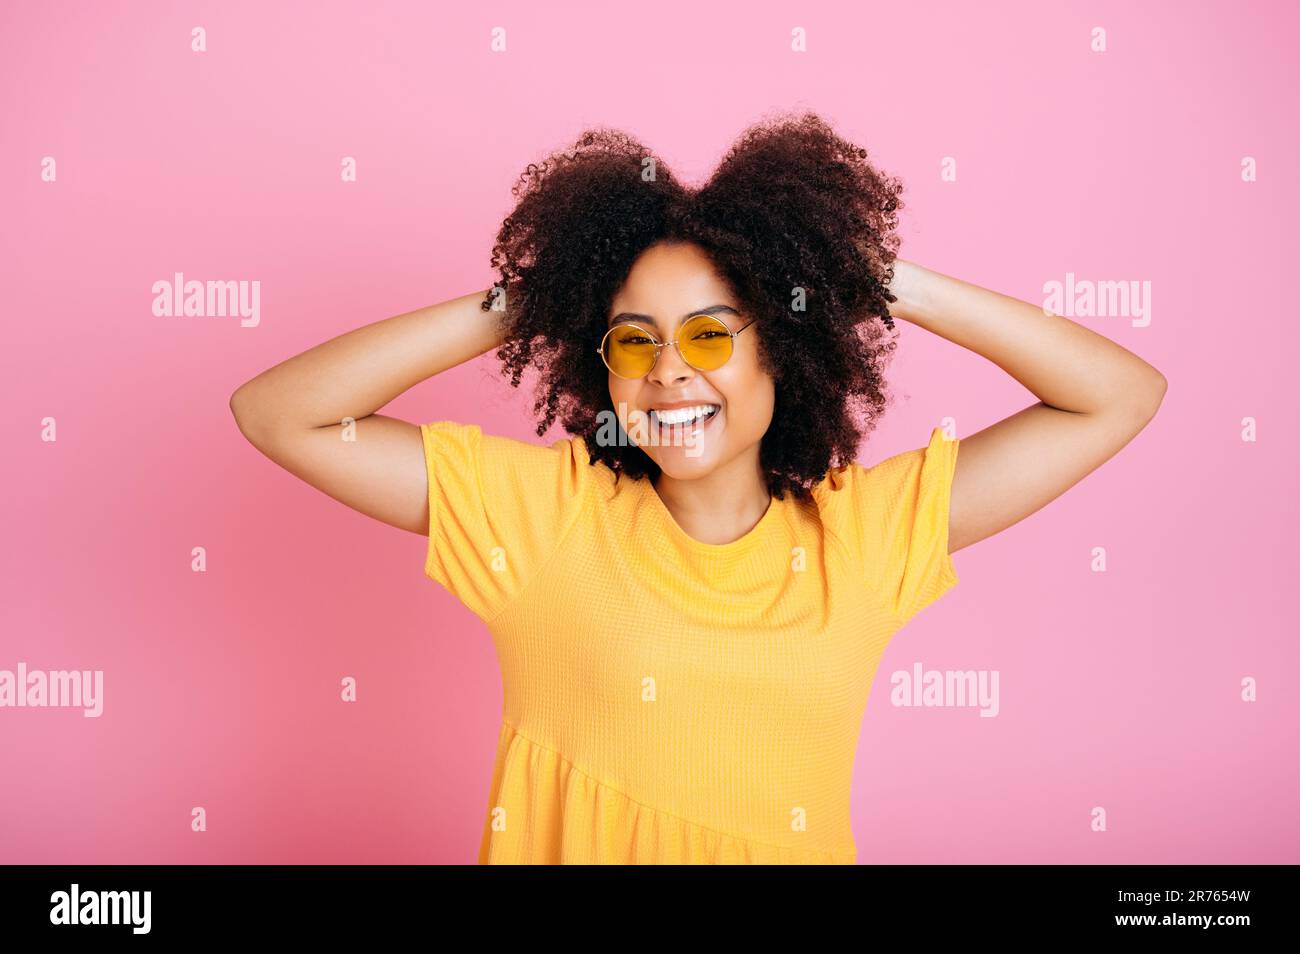 Lovely joyful excited african american or hispanic curly haired woman in trendy orange glasses and sundress, having fun, posing, holding hands on hair, looks at camera, smile, isolated pink background Stock Photo